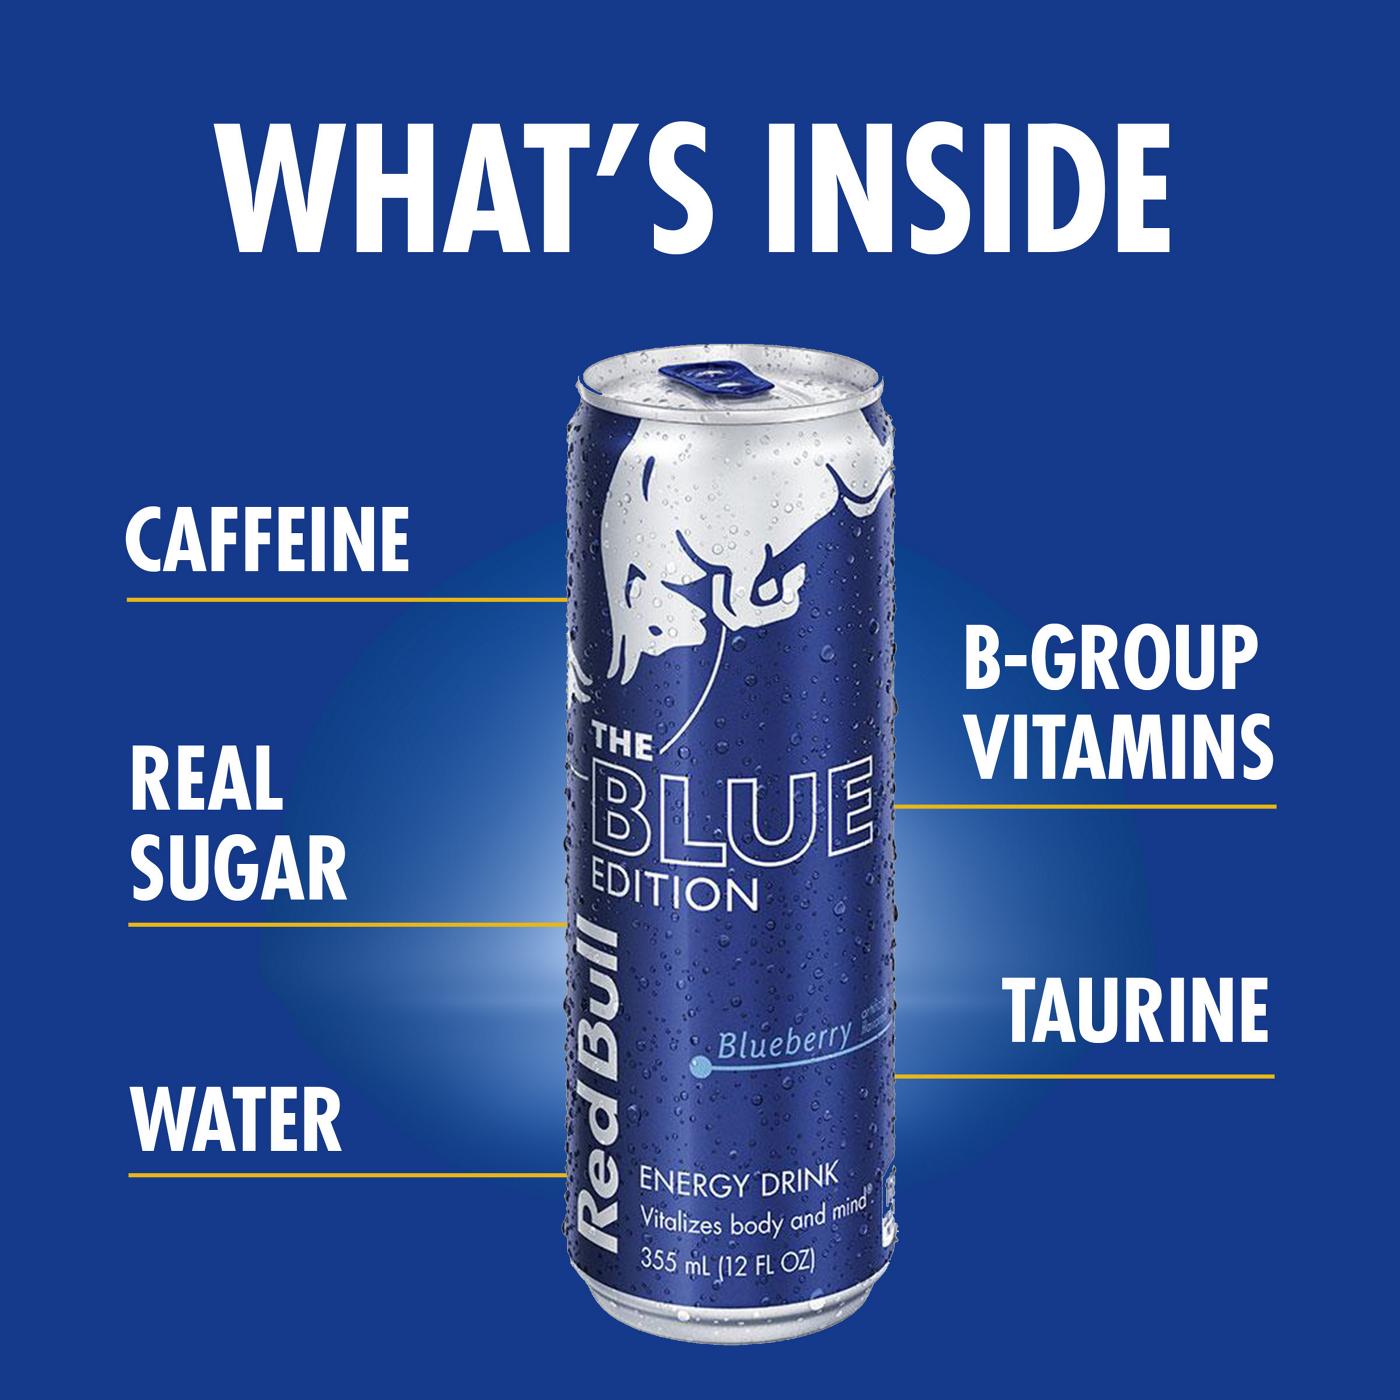 Red Bull The Blue Edition Blueberry Energy Drink; image 2 of 7